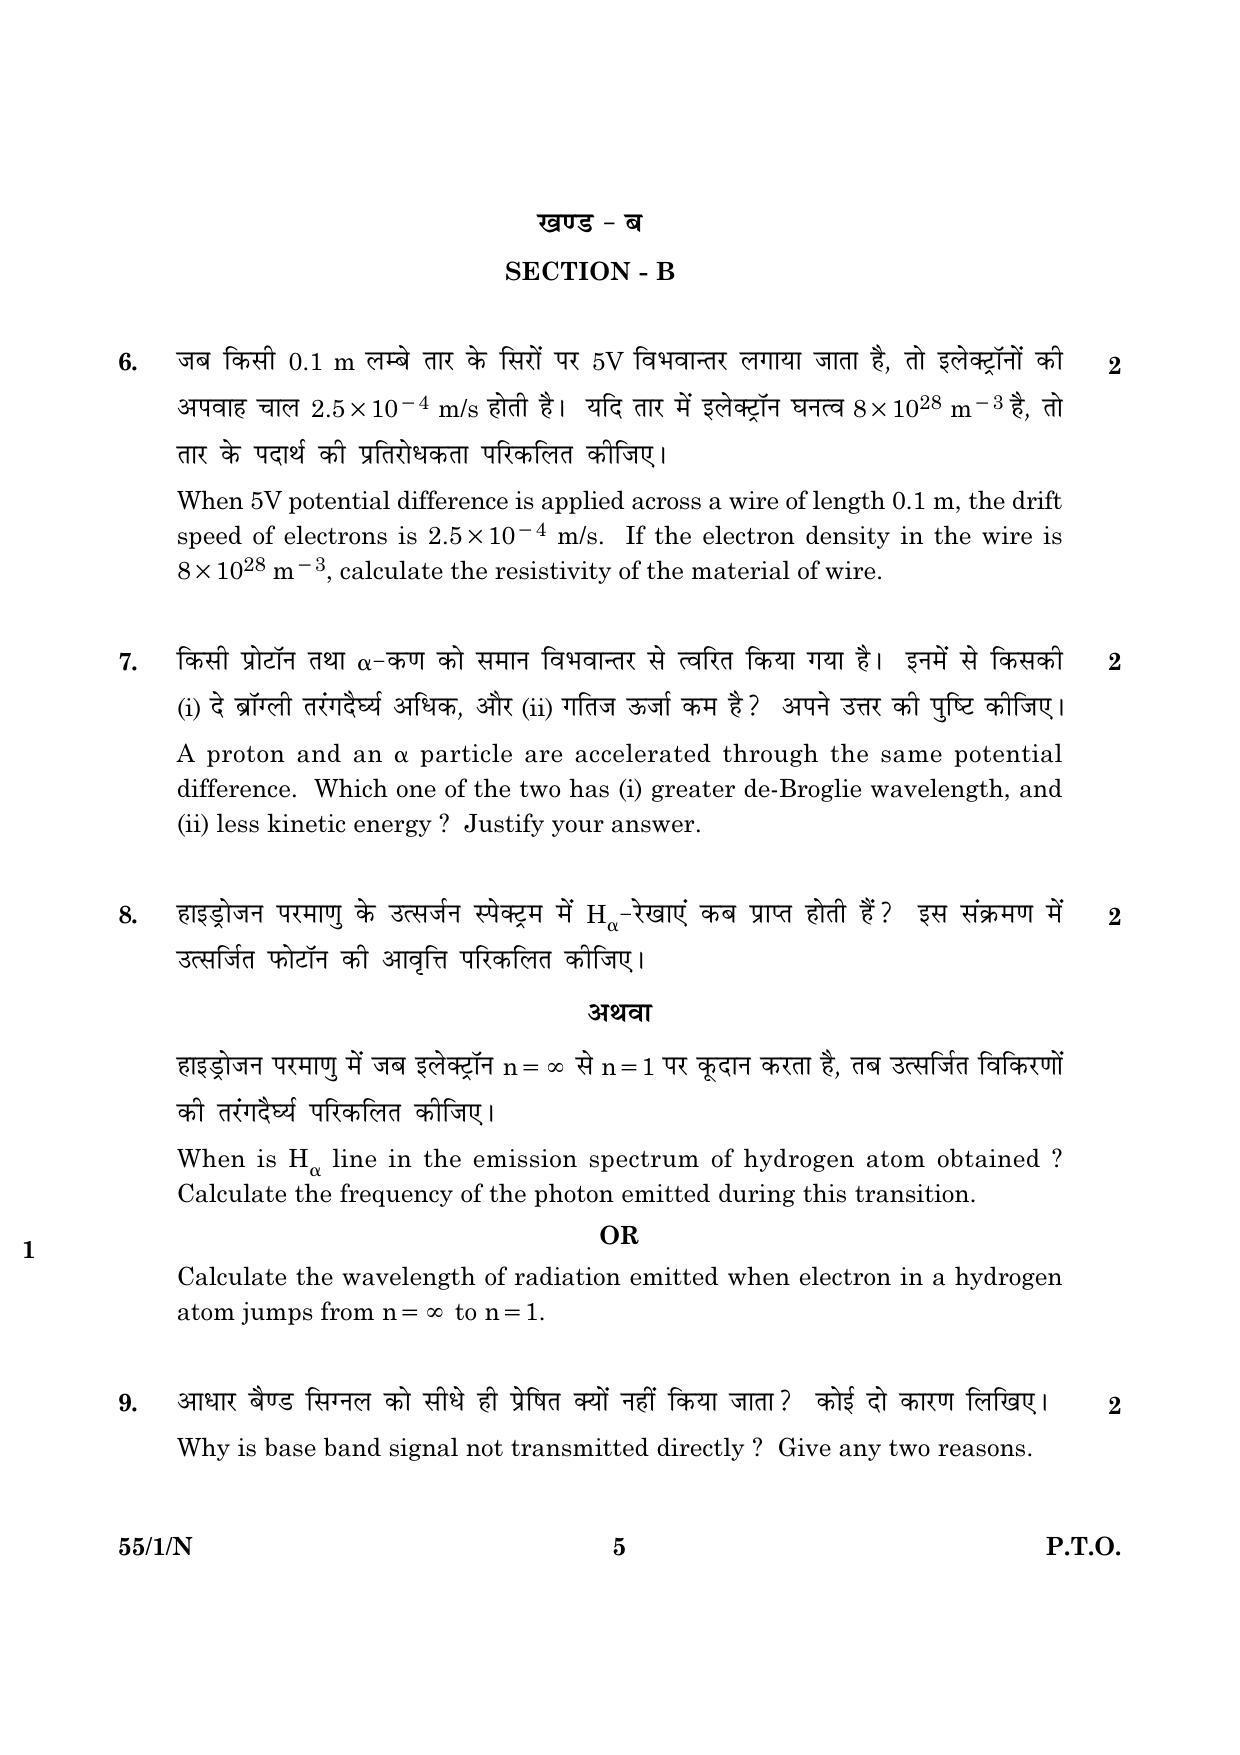 CBSE Class 12 055 Set 1 N Physics Theory 2016 Question Paper - Page 5